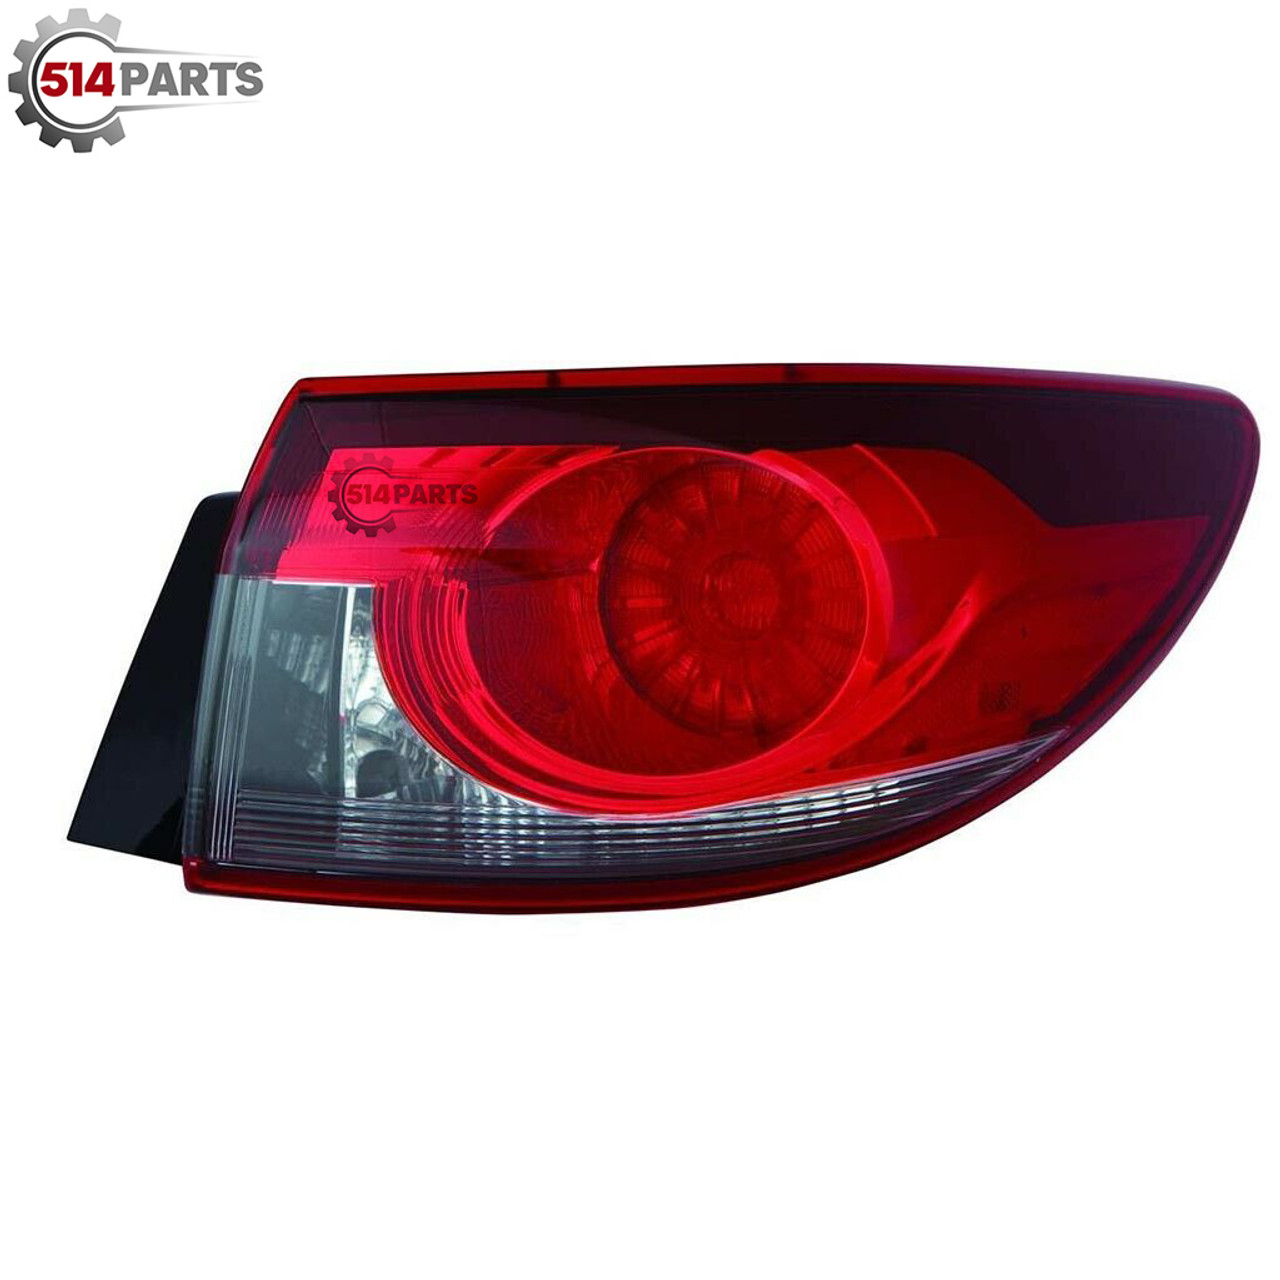 2014 - 2017 MAZDA 6 TAIL LIGHTS High Quality - PHARES ARRIERE Haute Qualite